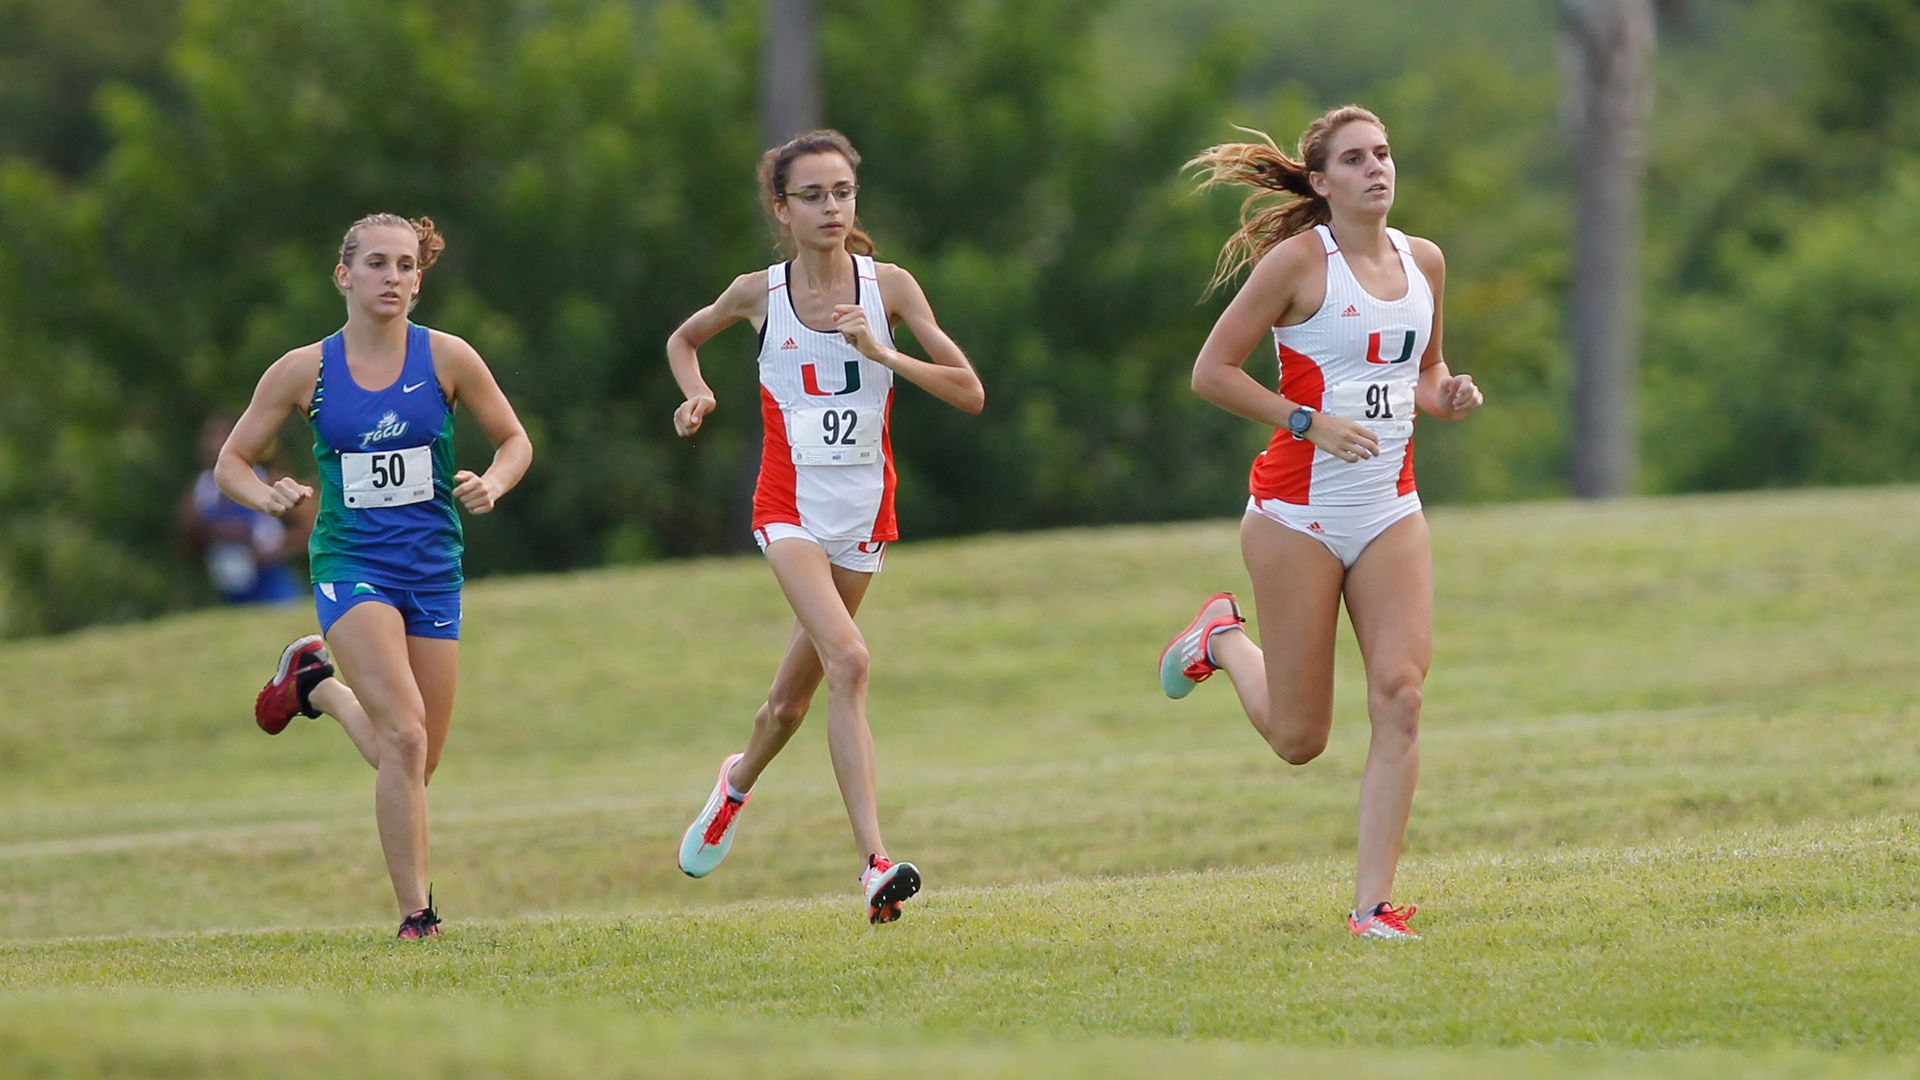 Jawid and Kuck Lead Canes at Mountain Dew Invitational